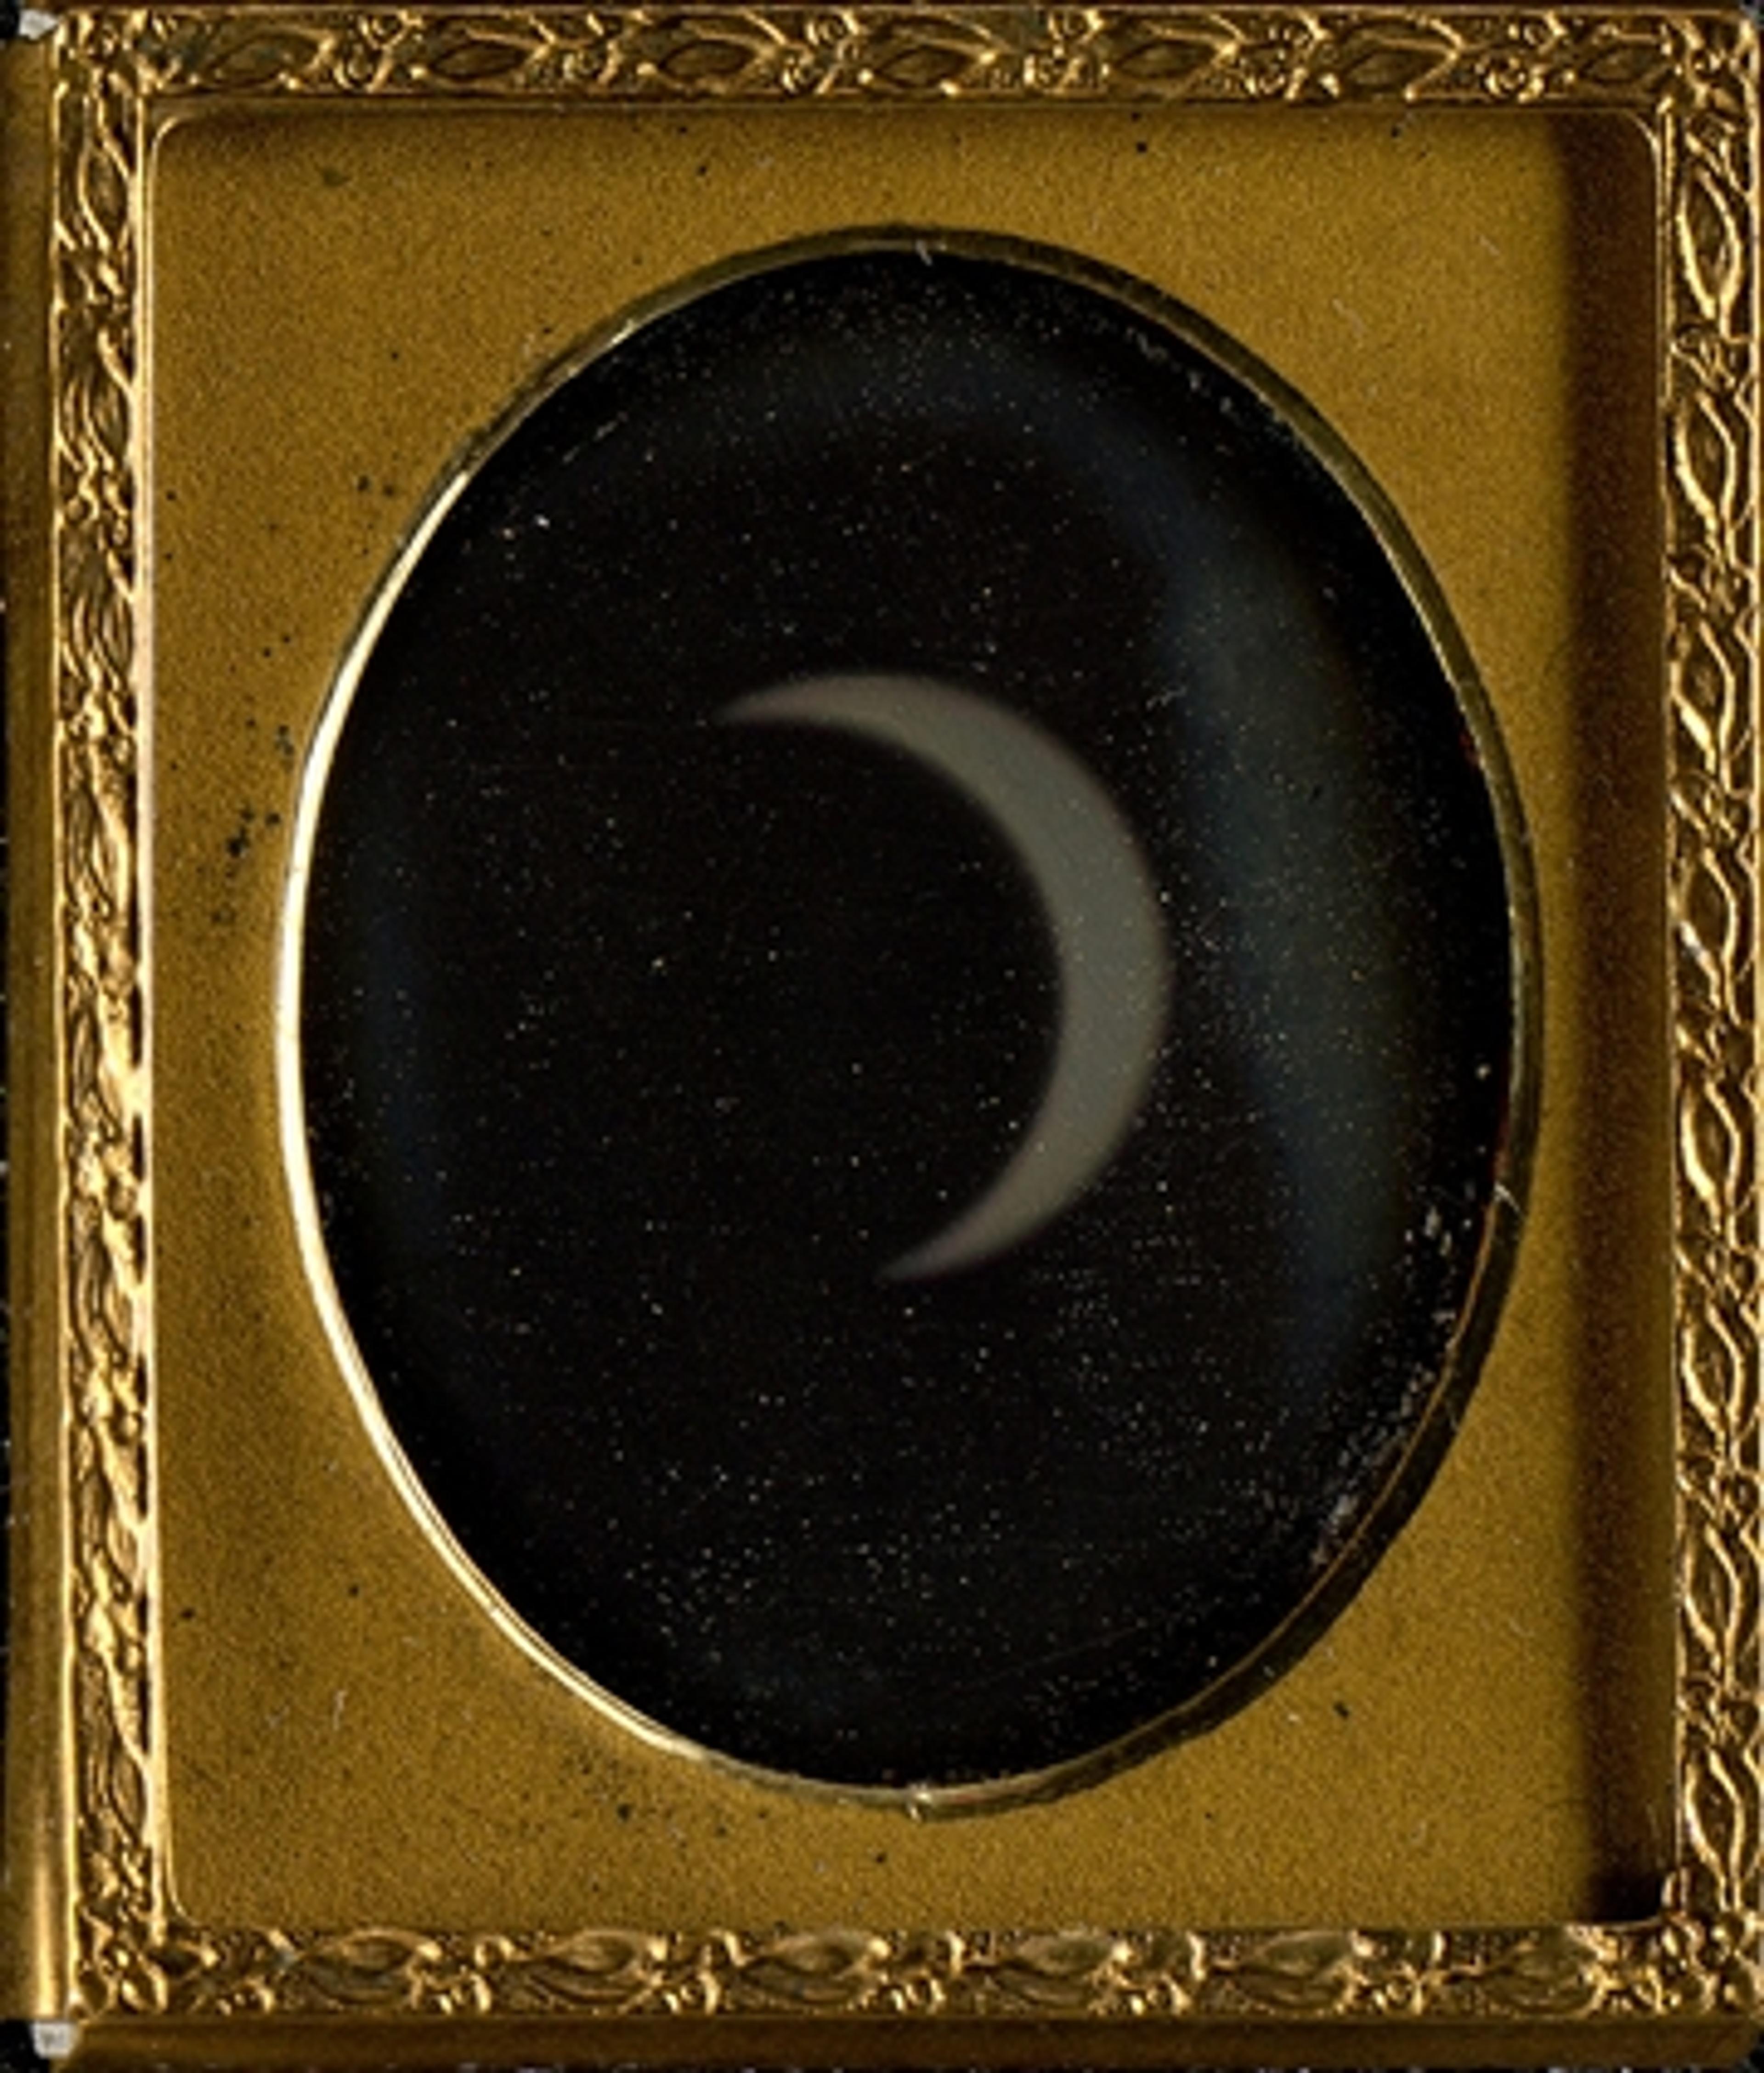 A daguerreotype photograph of a total solar eclipse by William and Frederick Langenheim